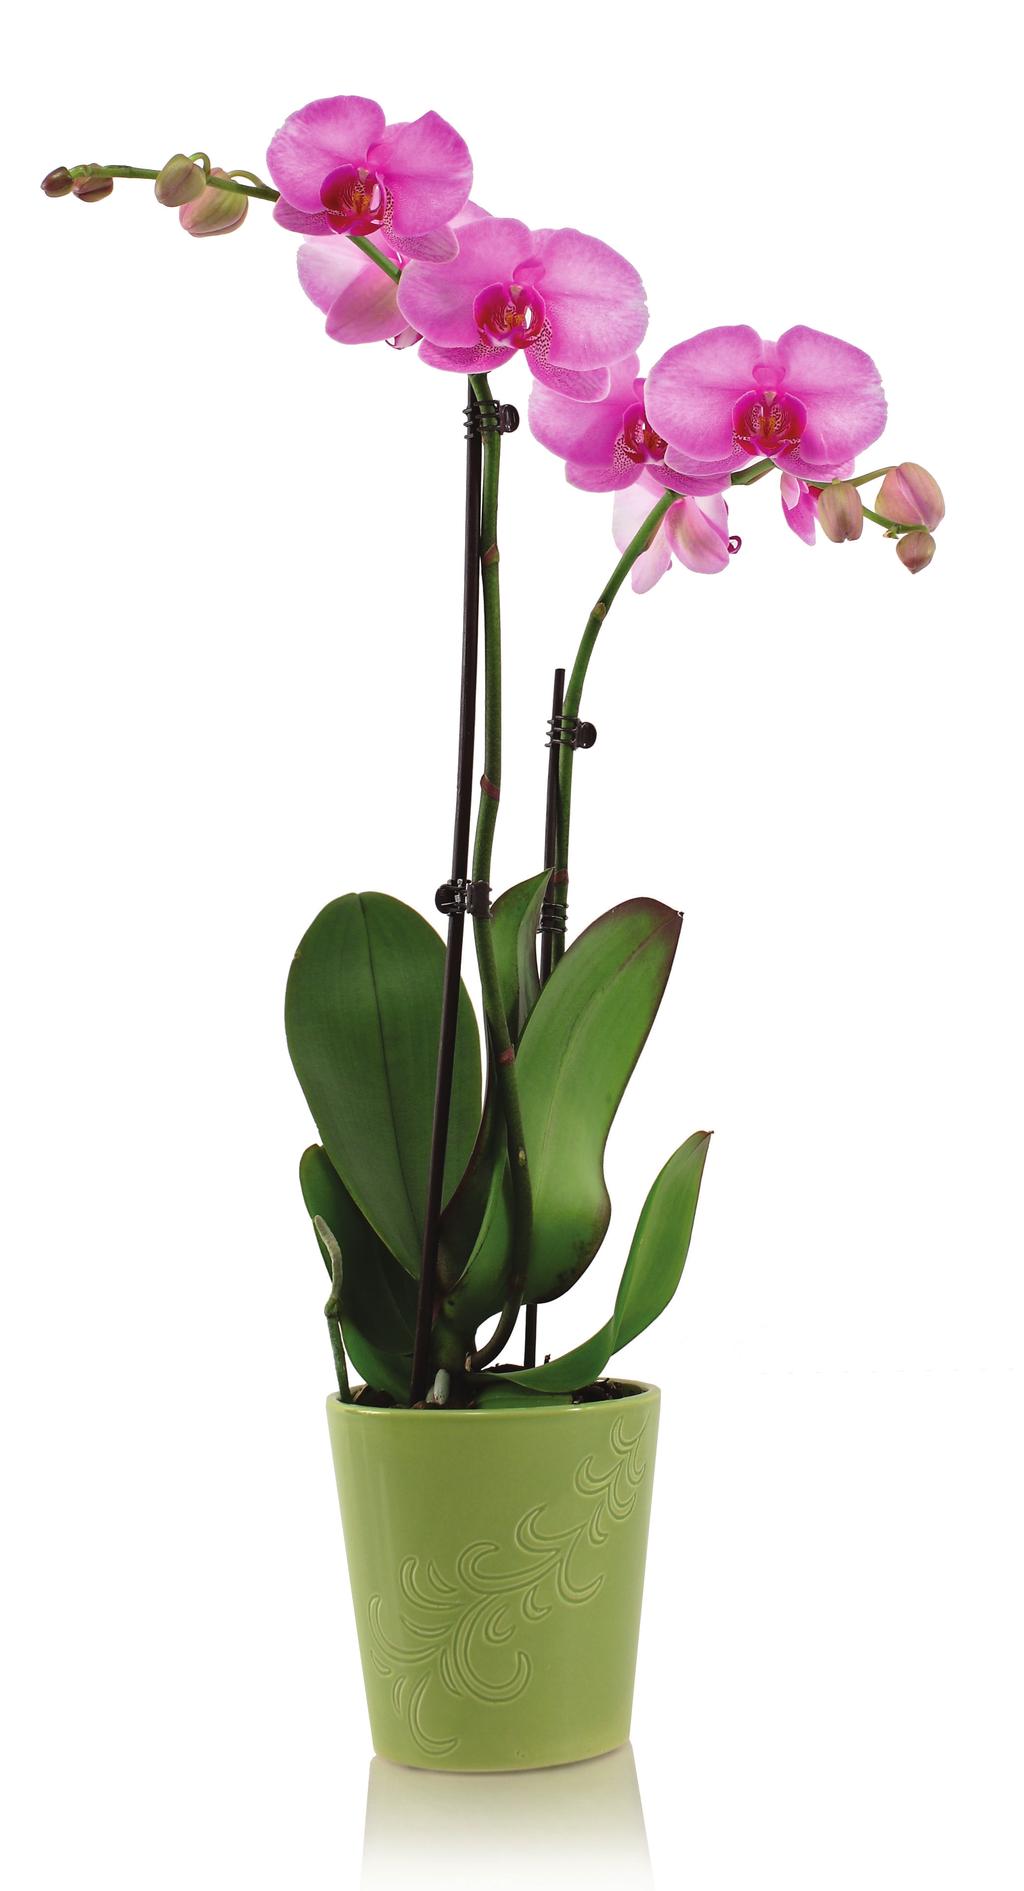 When a Phalaenopsis orchid grows in nature, it follows a fairly standard blooming cycle.